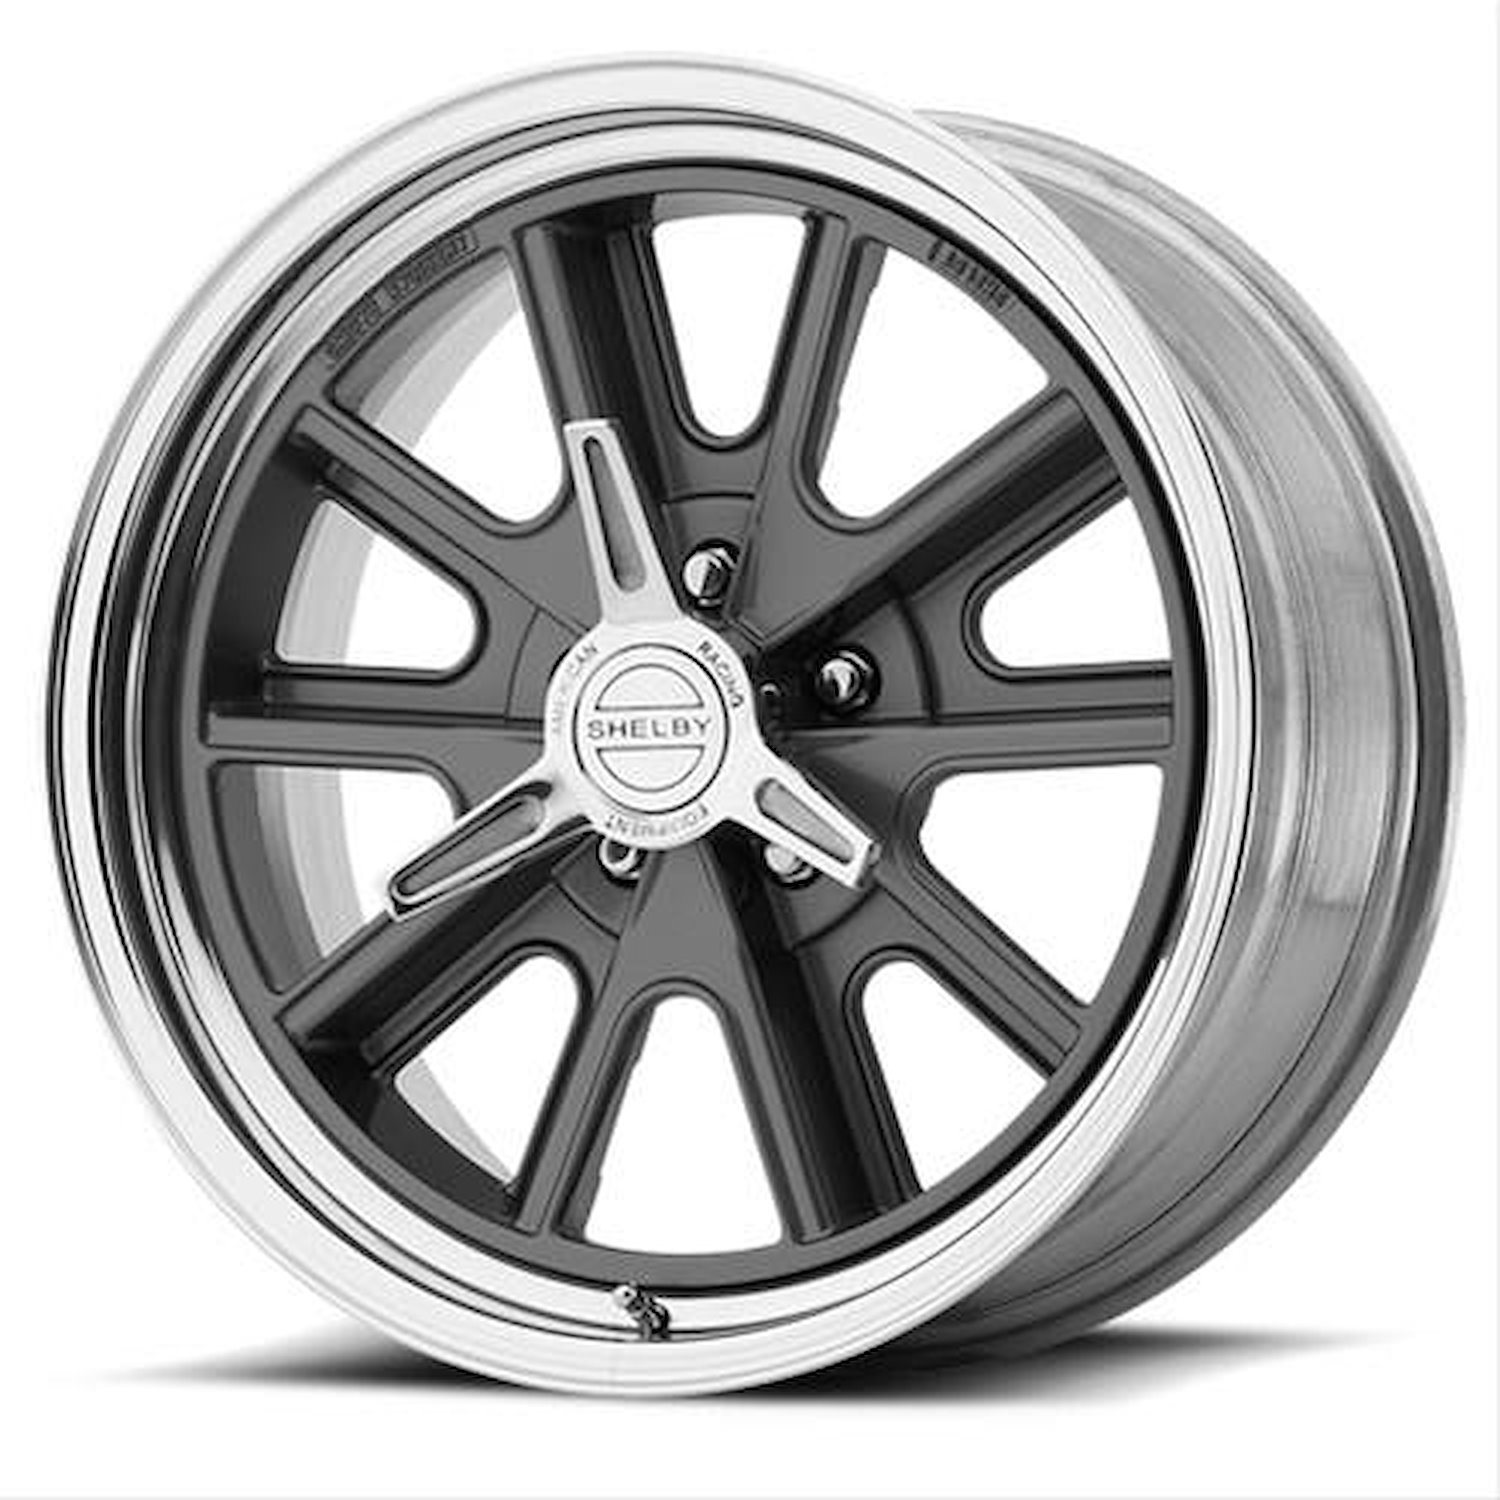 AMERICAN RACING 427 SHELBY COBRA TWO-PIECE MAG GRAY CENTER POLISHED BARREL 15 x 10 5x4.5 19 6.25